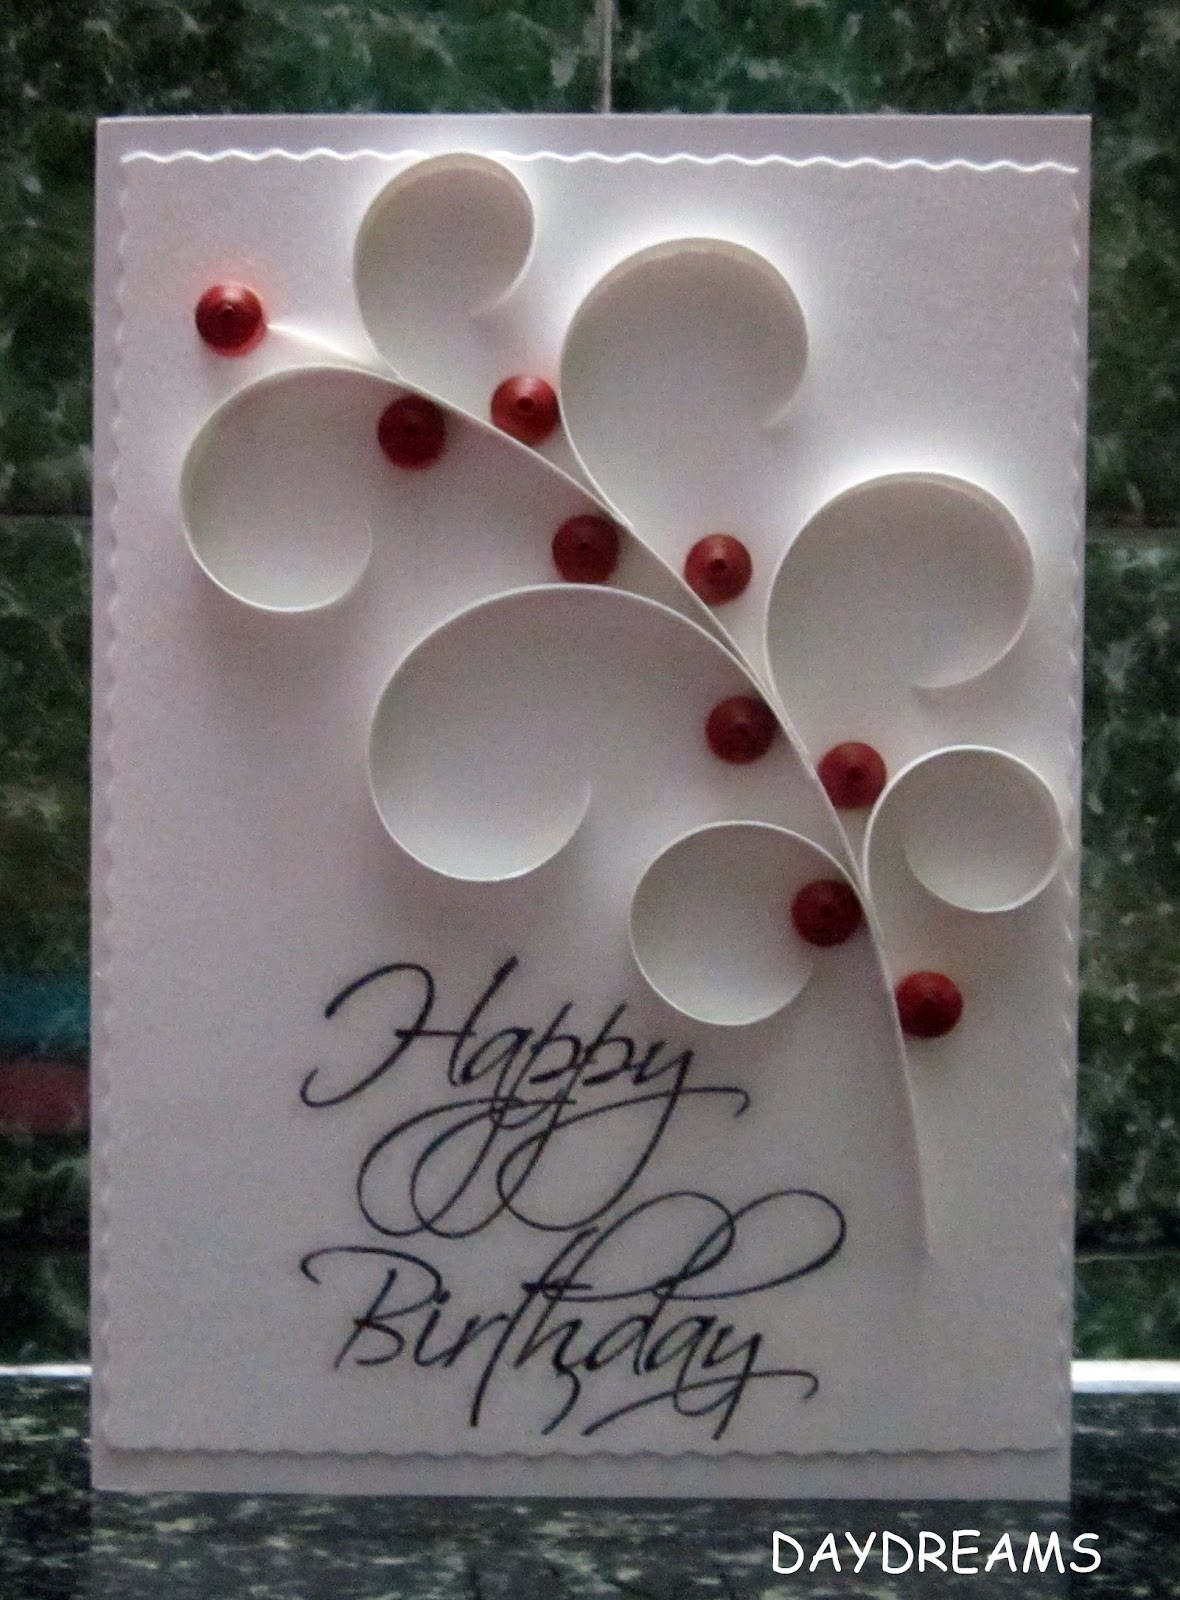 Best ideas about Birthday Card Designs
. Save or Pin DAYDREAMS Quilled birthday card Now.